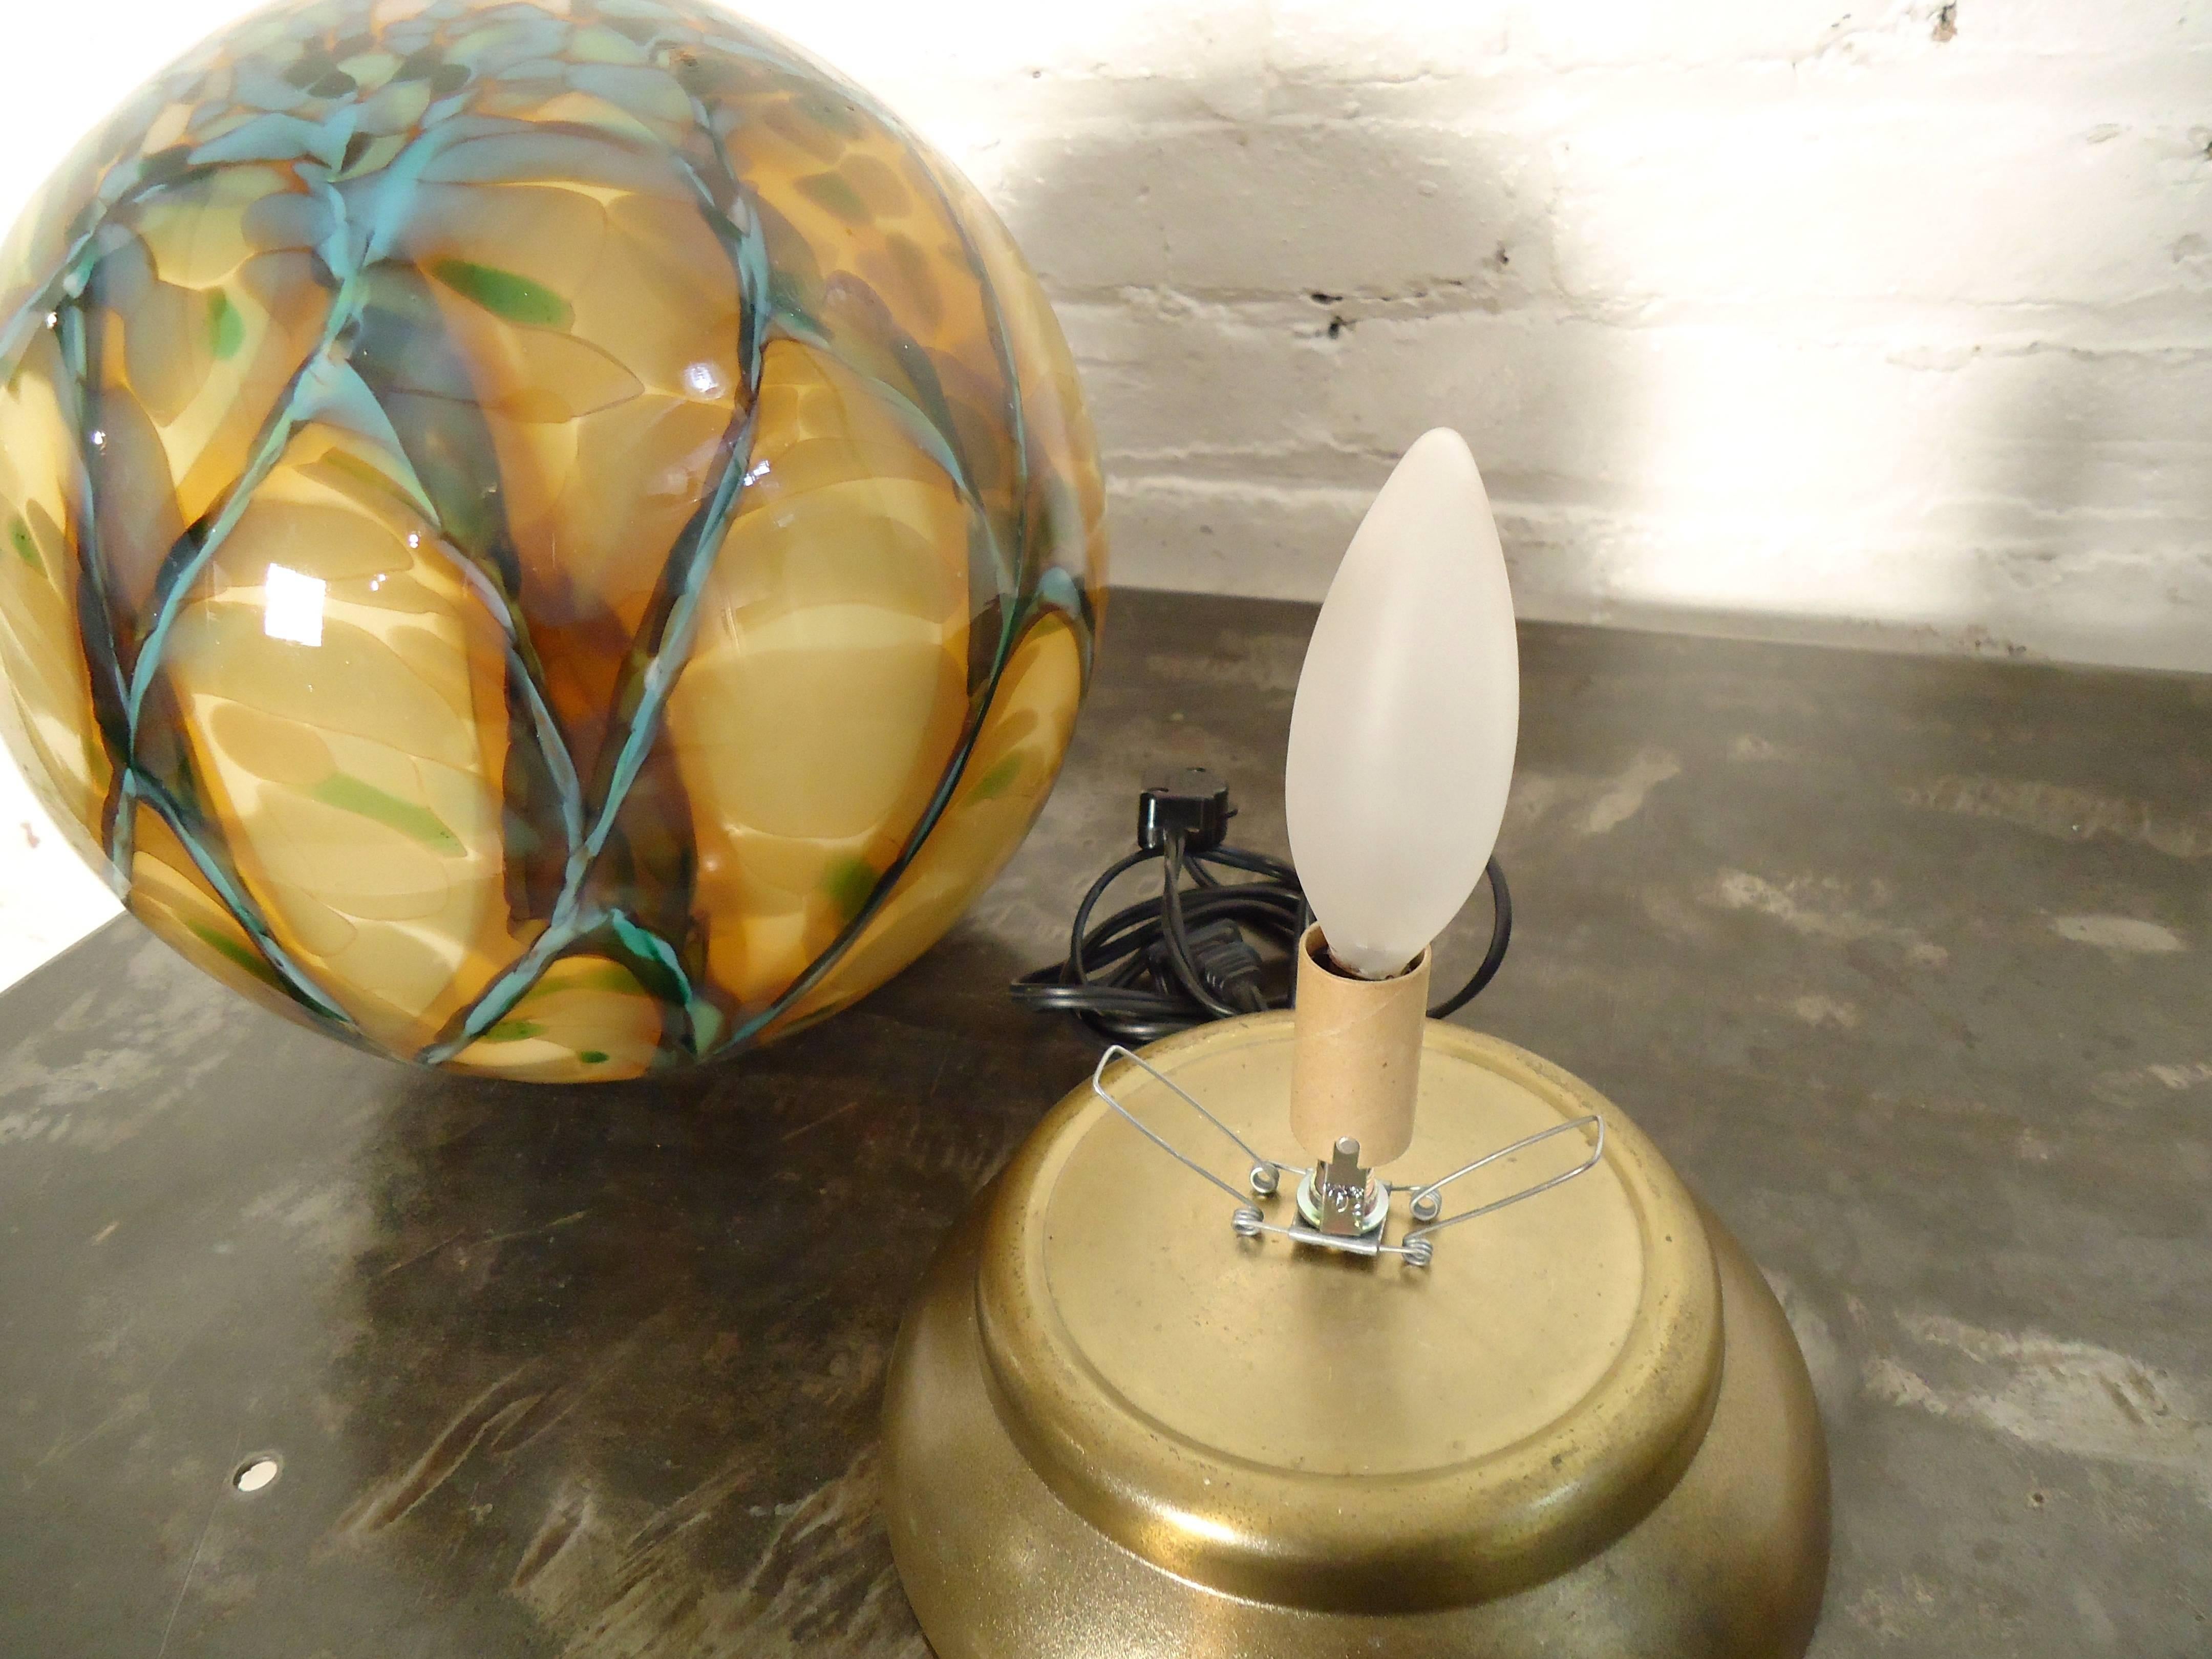 Very unusual vintage modern sphere table lamp, features a very colorful stained marble glass design.

(Please confirm item location NY or NJ with dealer).